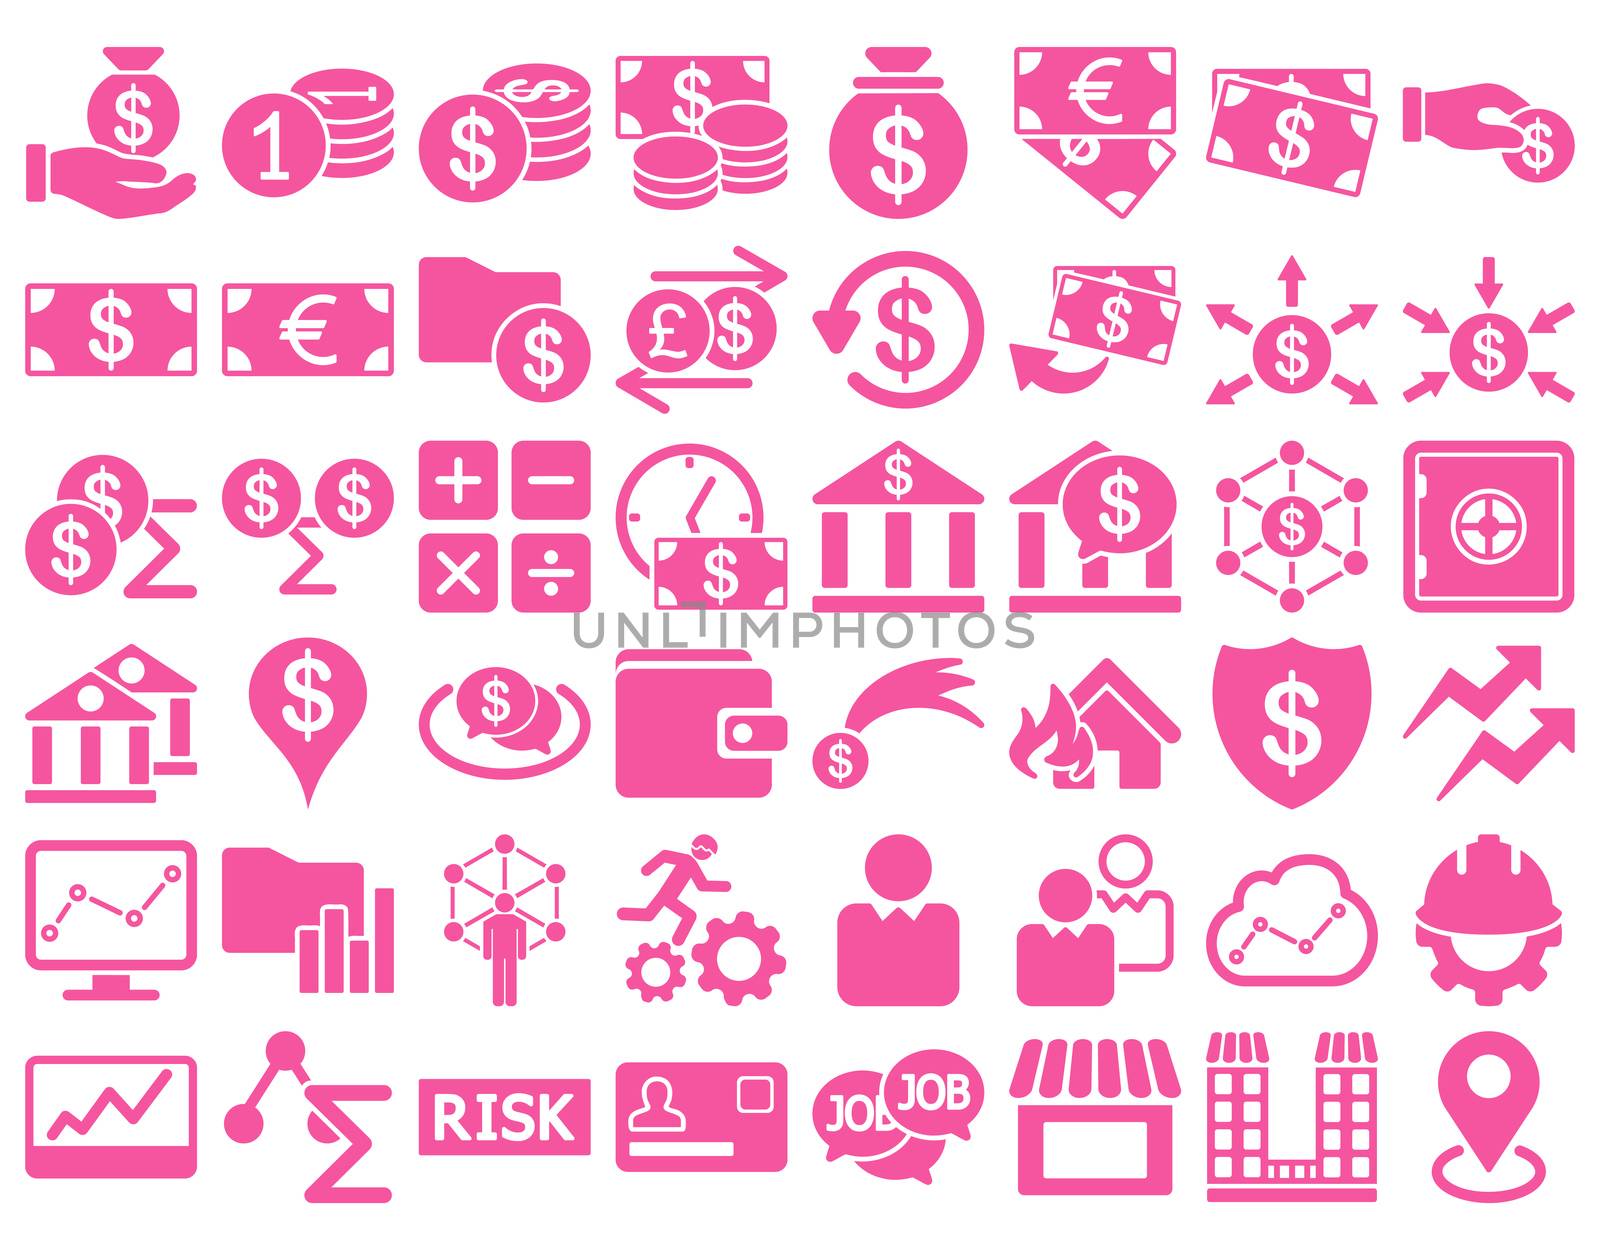 Business Icon Set. These flat icons use pink color. Raster images are isolated on a white background.